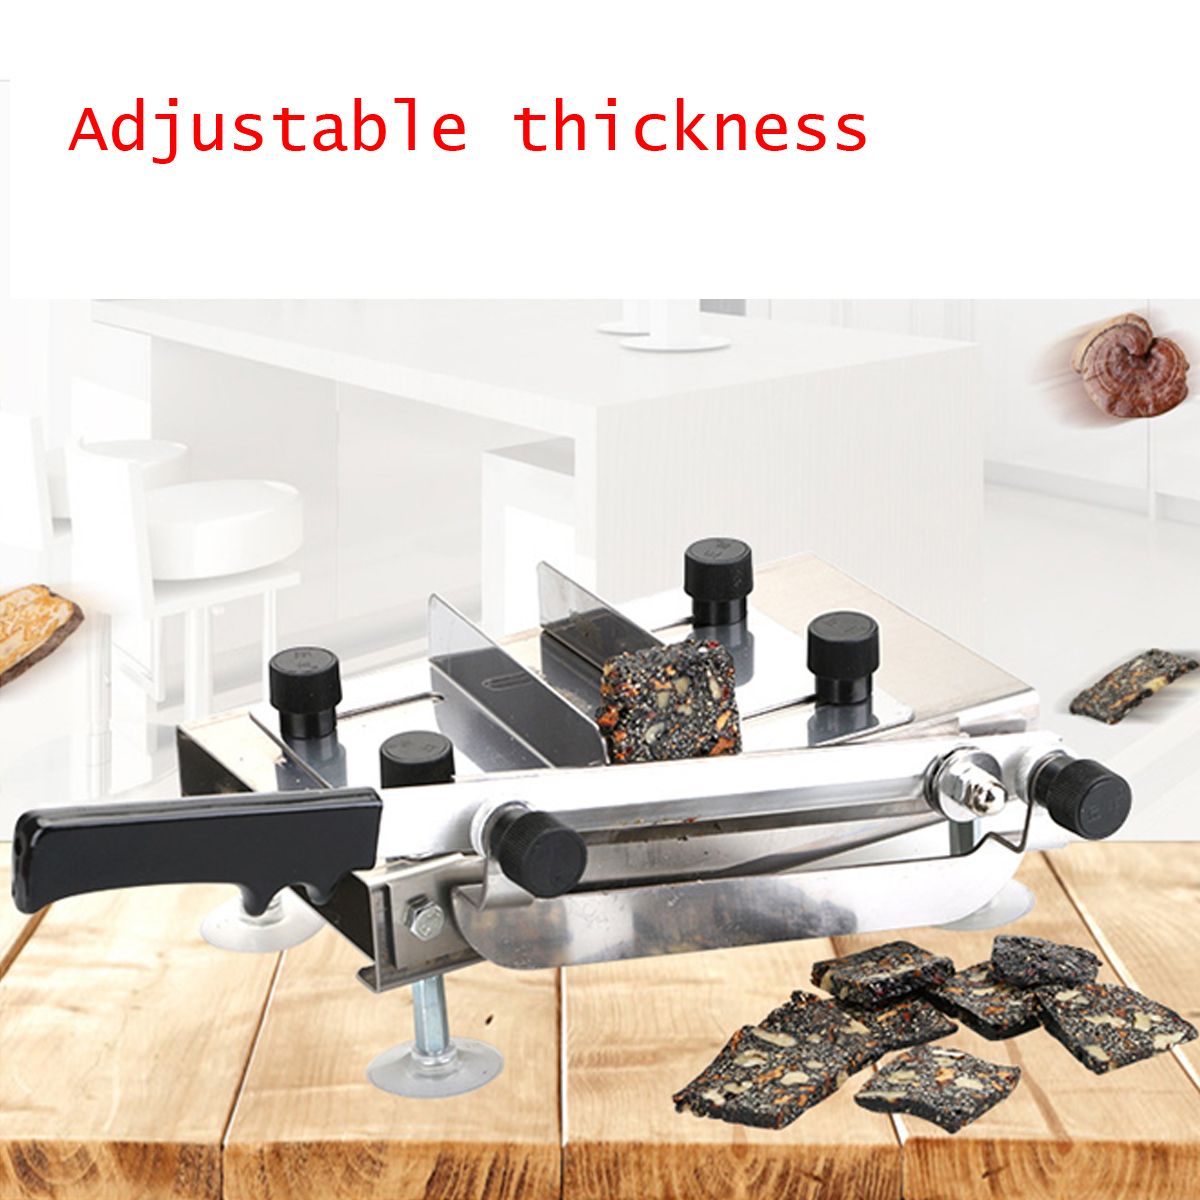 Manual-Food-Meat-Slicer-Stainless-Steel-Food-Meat-Cutter-Machine-Adjustable-Thickness-1381448